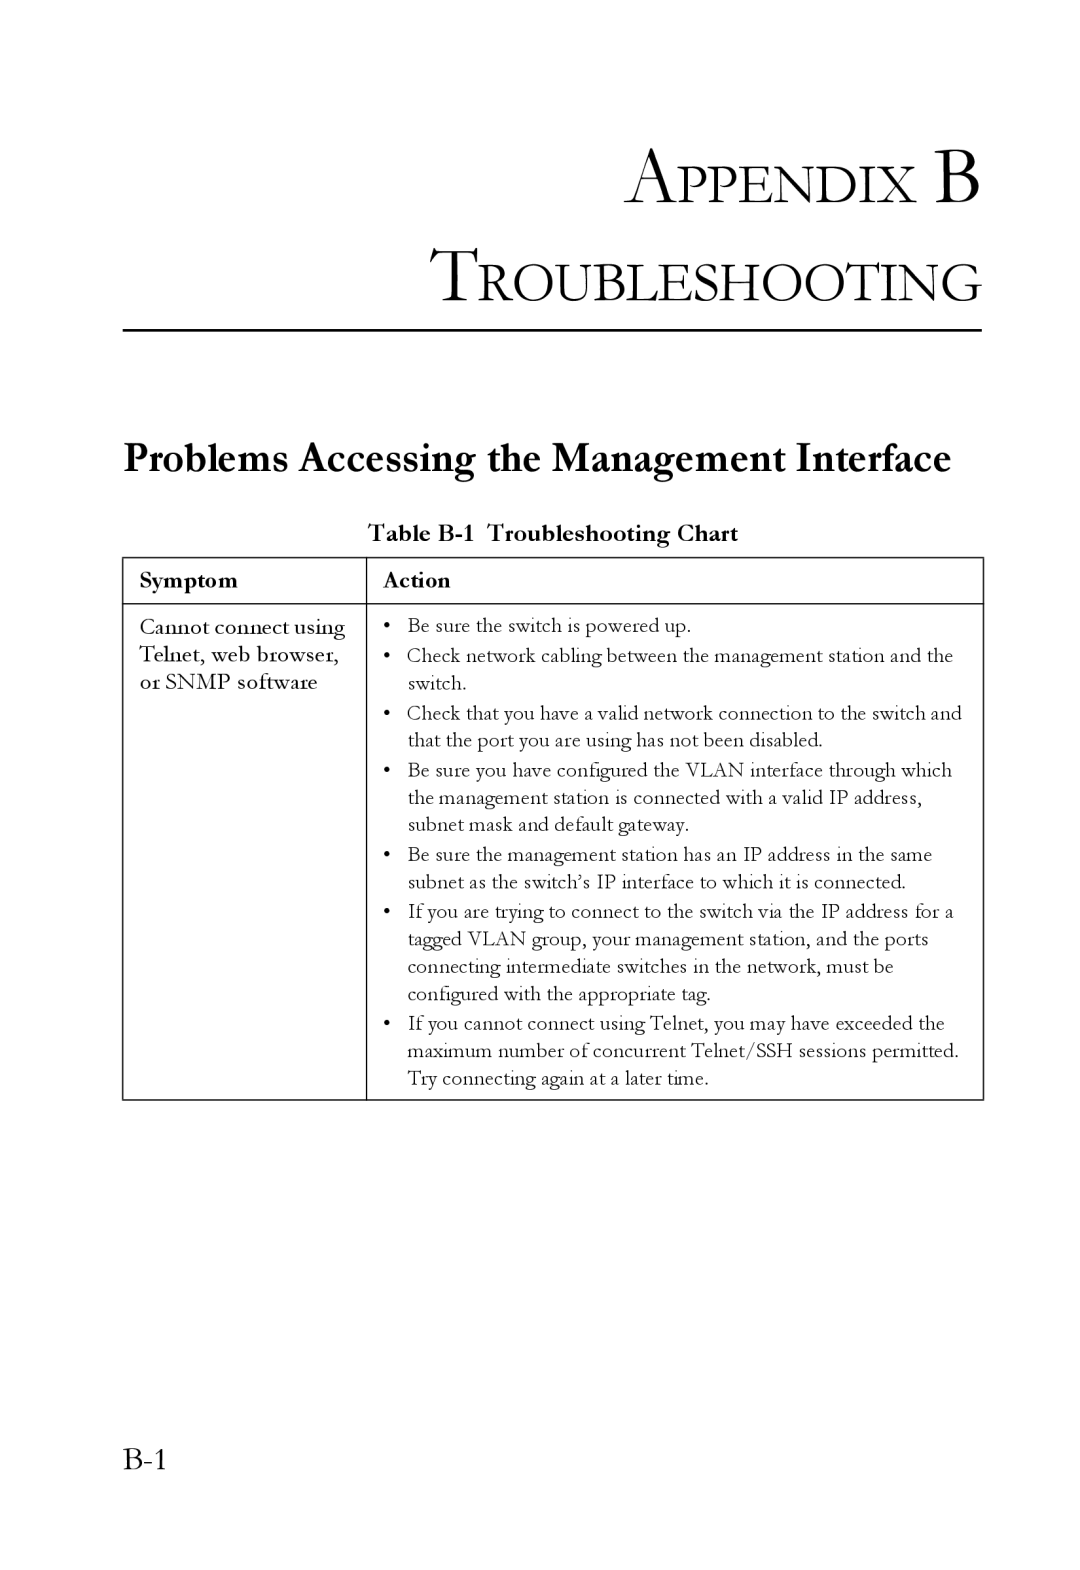 SMC Networks SMC6824M manual Problems Accessing the Management Interface, Table B-1 Troubleshooting Chart, Symptom Action 